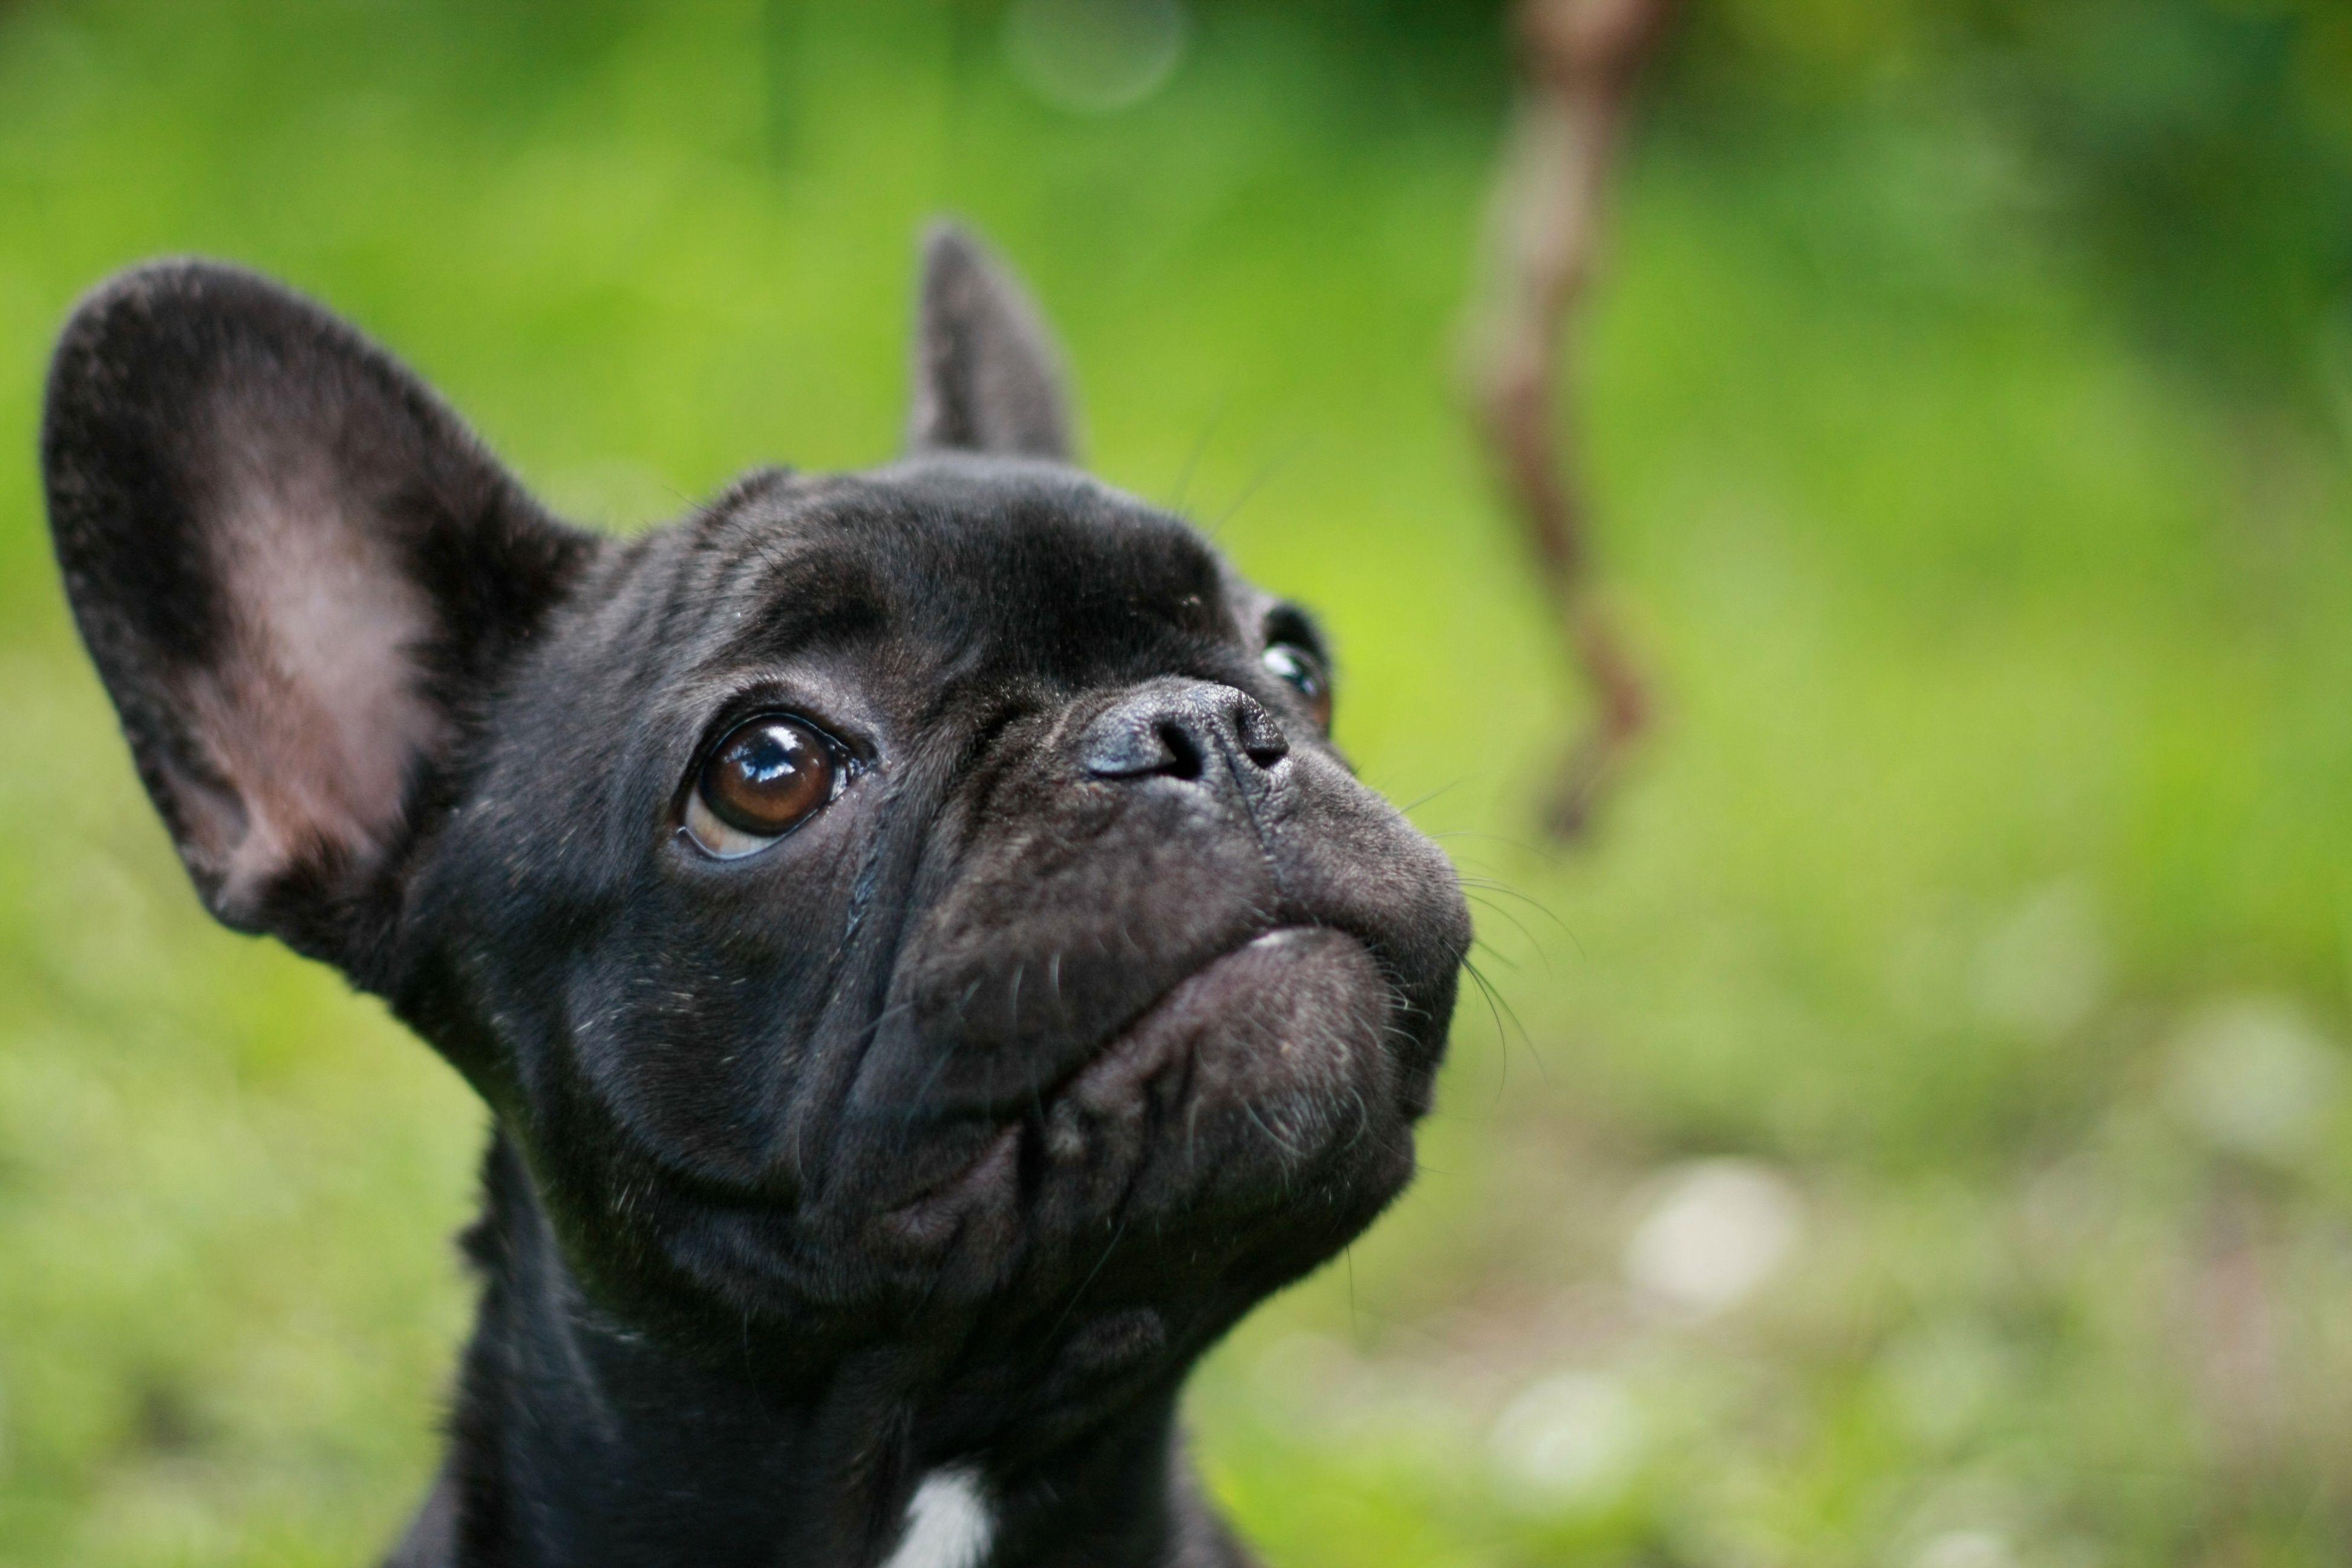 French bulldog puppy looking up with puppy dog eyes while playing with a stick outside.